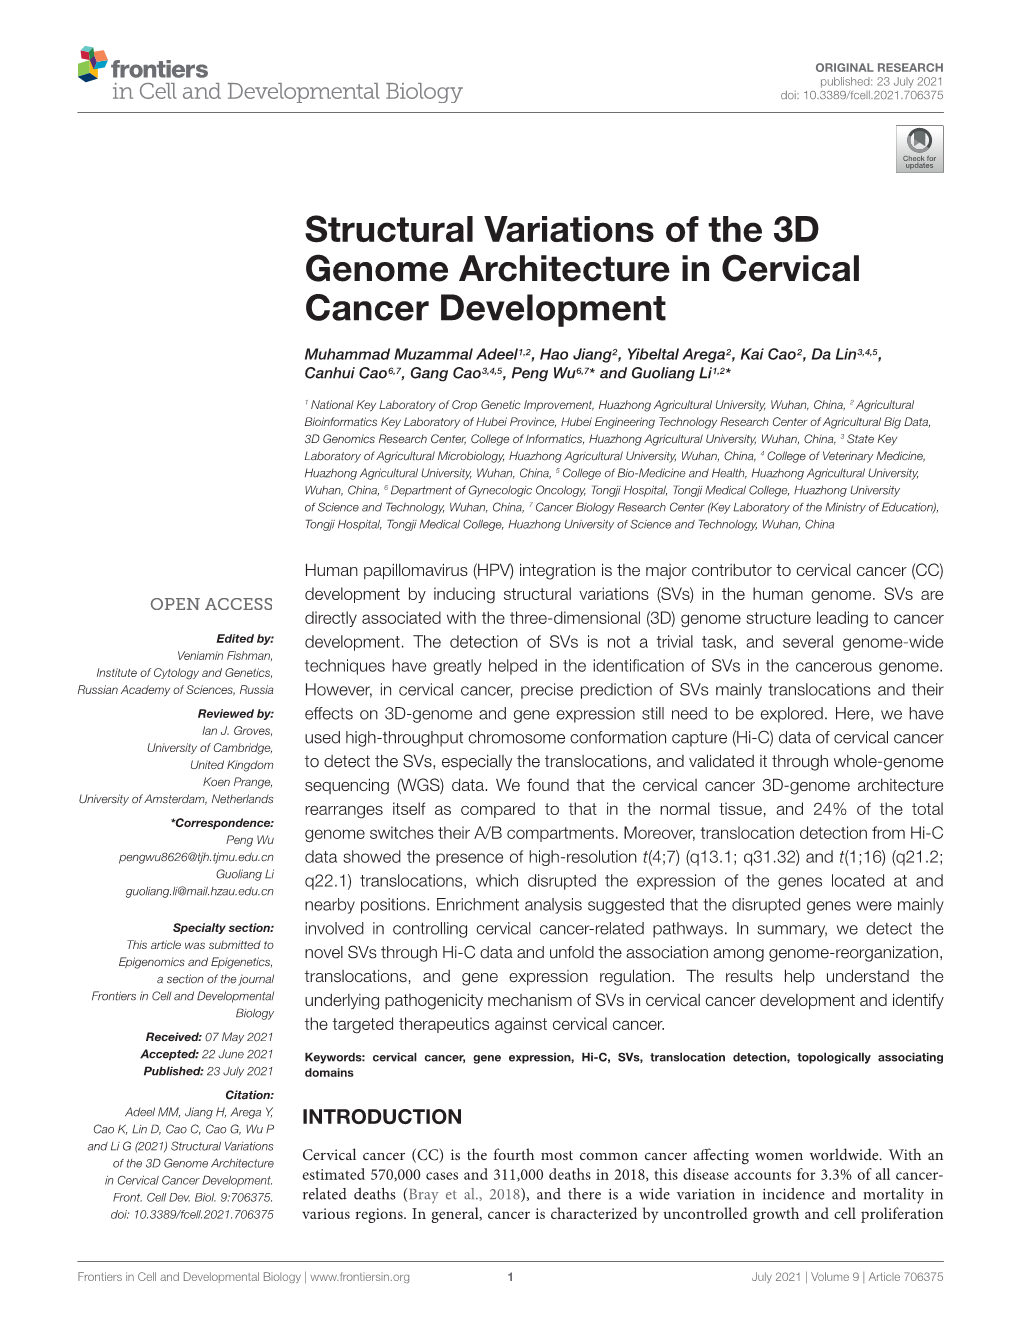 Structural Variations of the 3D Genome Architecture in Cervical Cancer Development